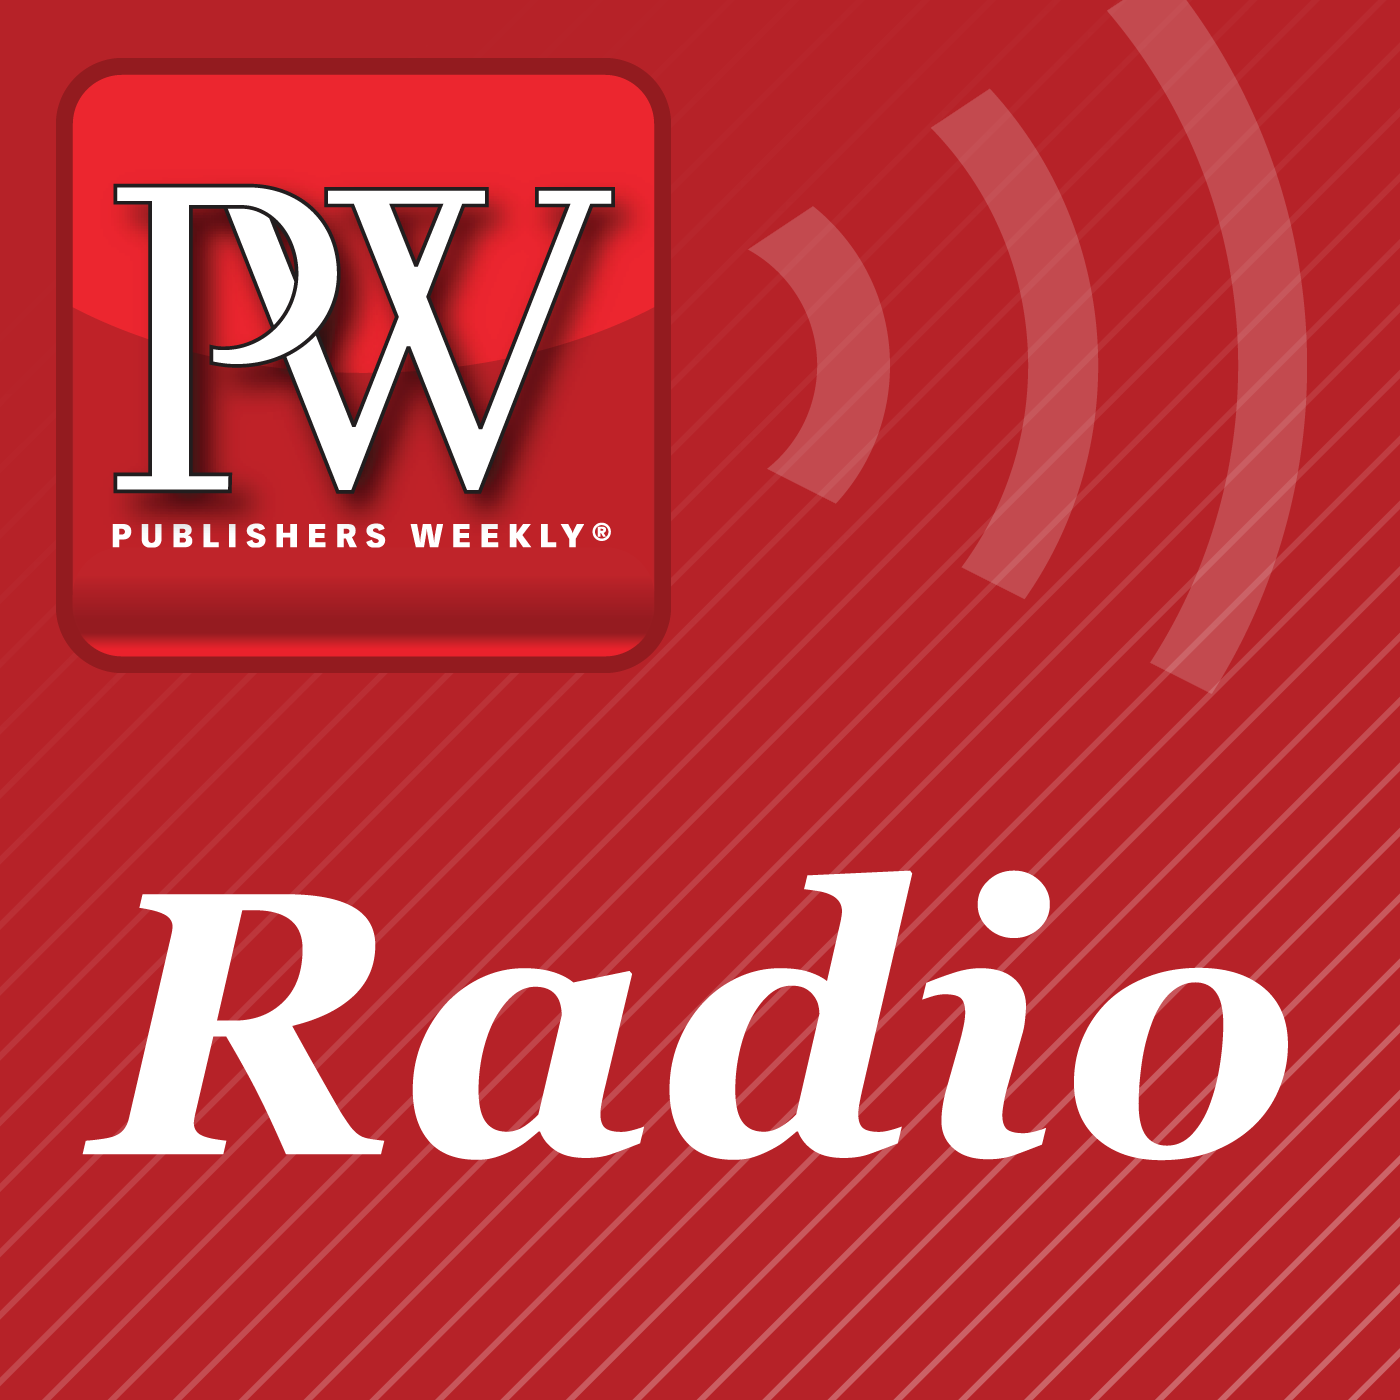 PW Radio 285: Paul French; Top Books for the First Half of 2018; Big Changes for PW Radio